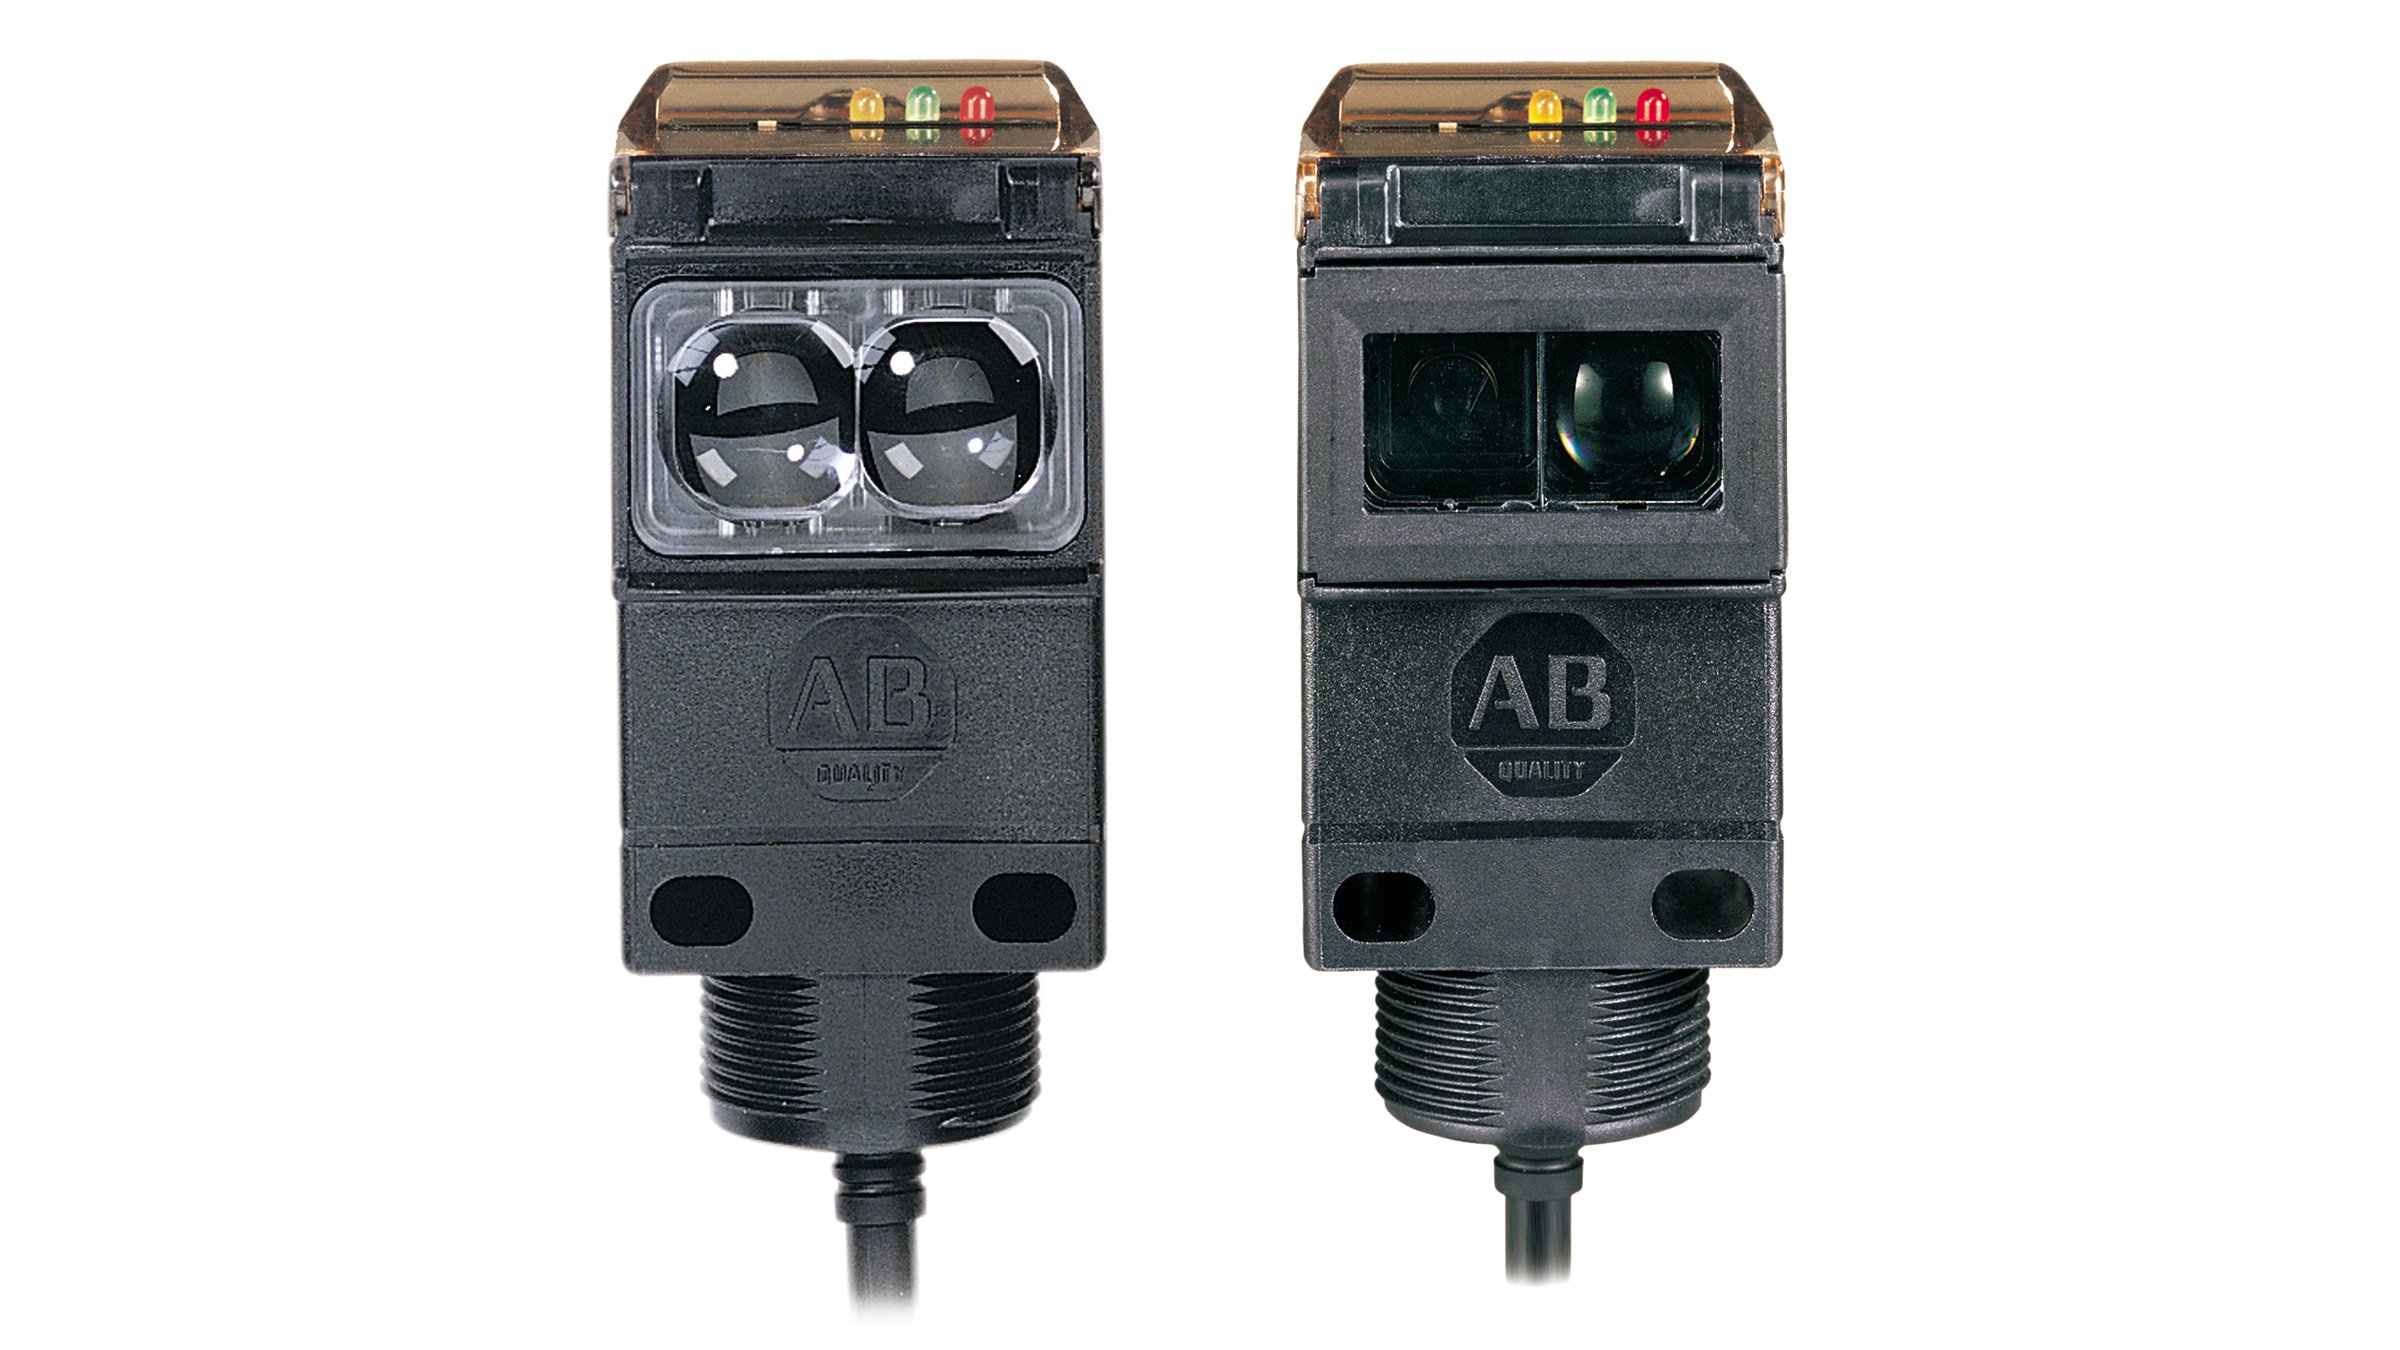 Two Allen-Bradley black rectangular sensors with integrated cables.